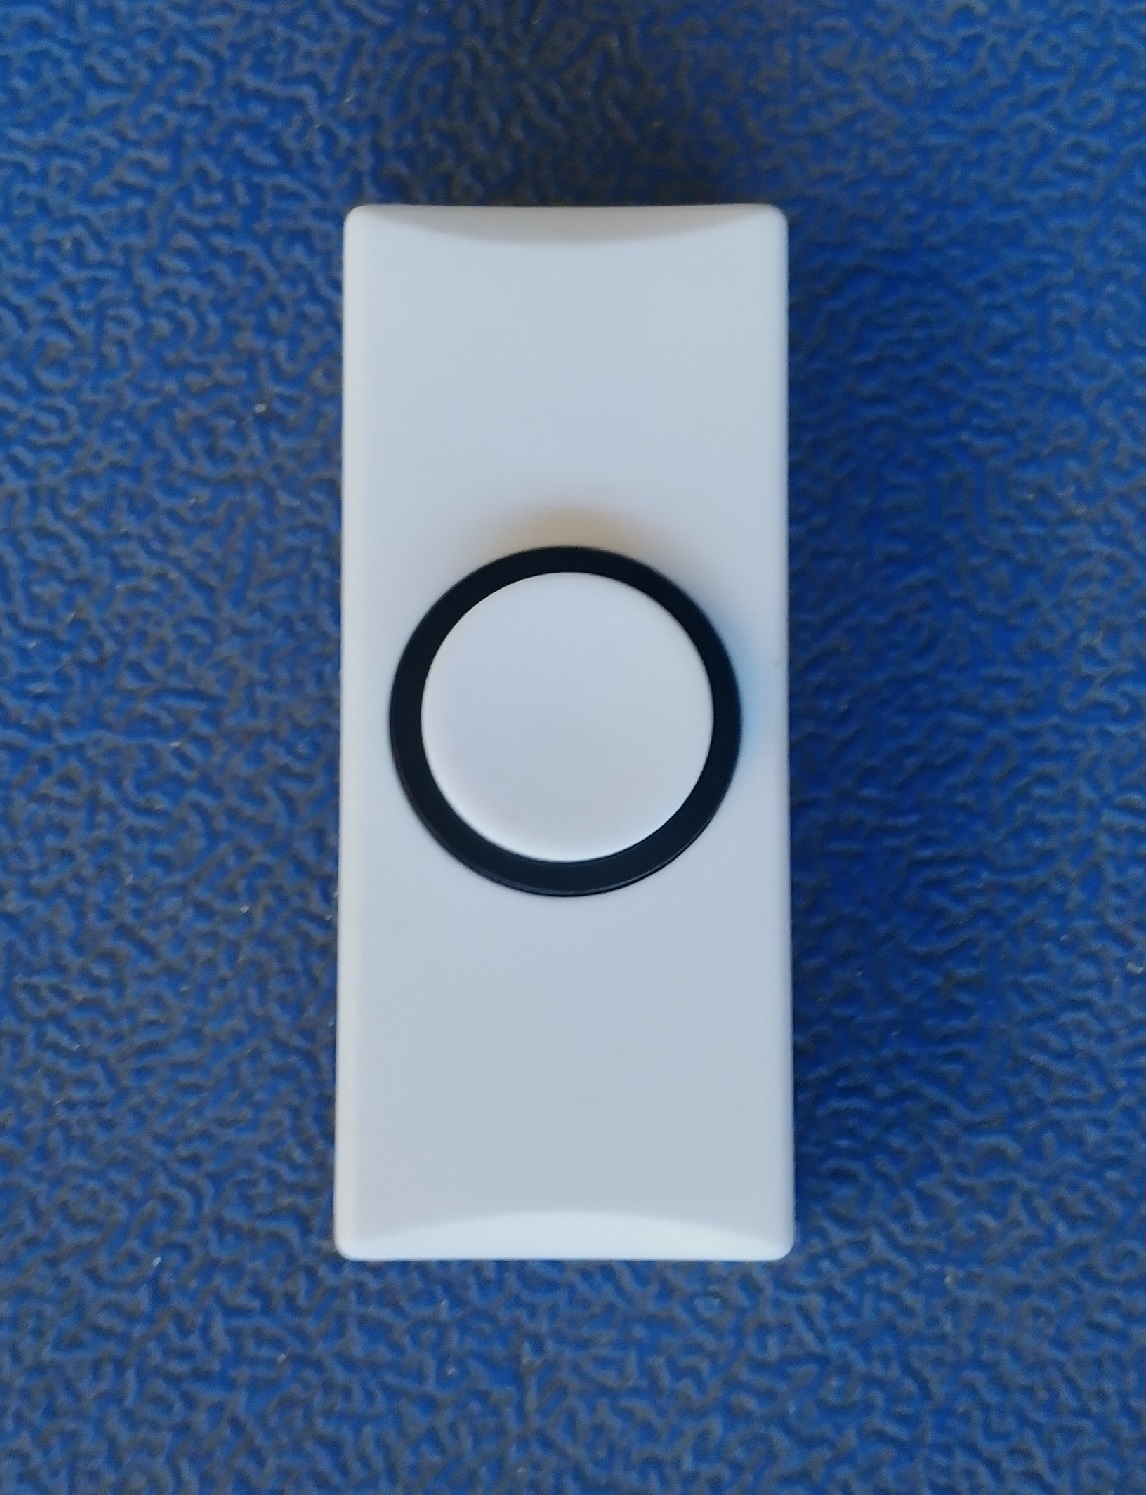 arlec hard-wired push button switch